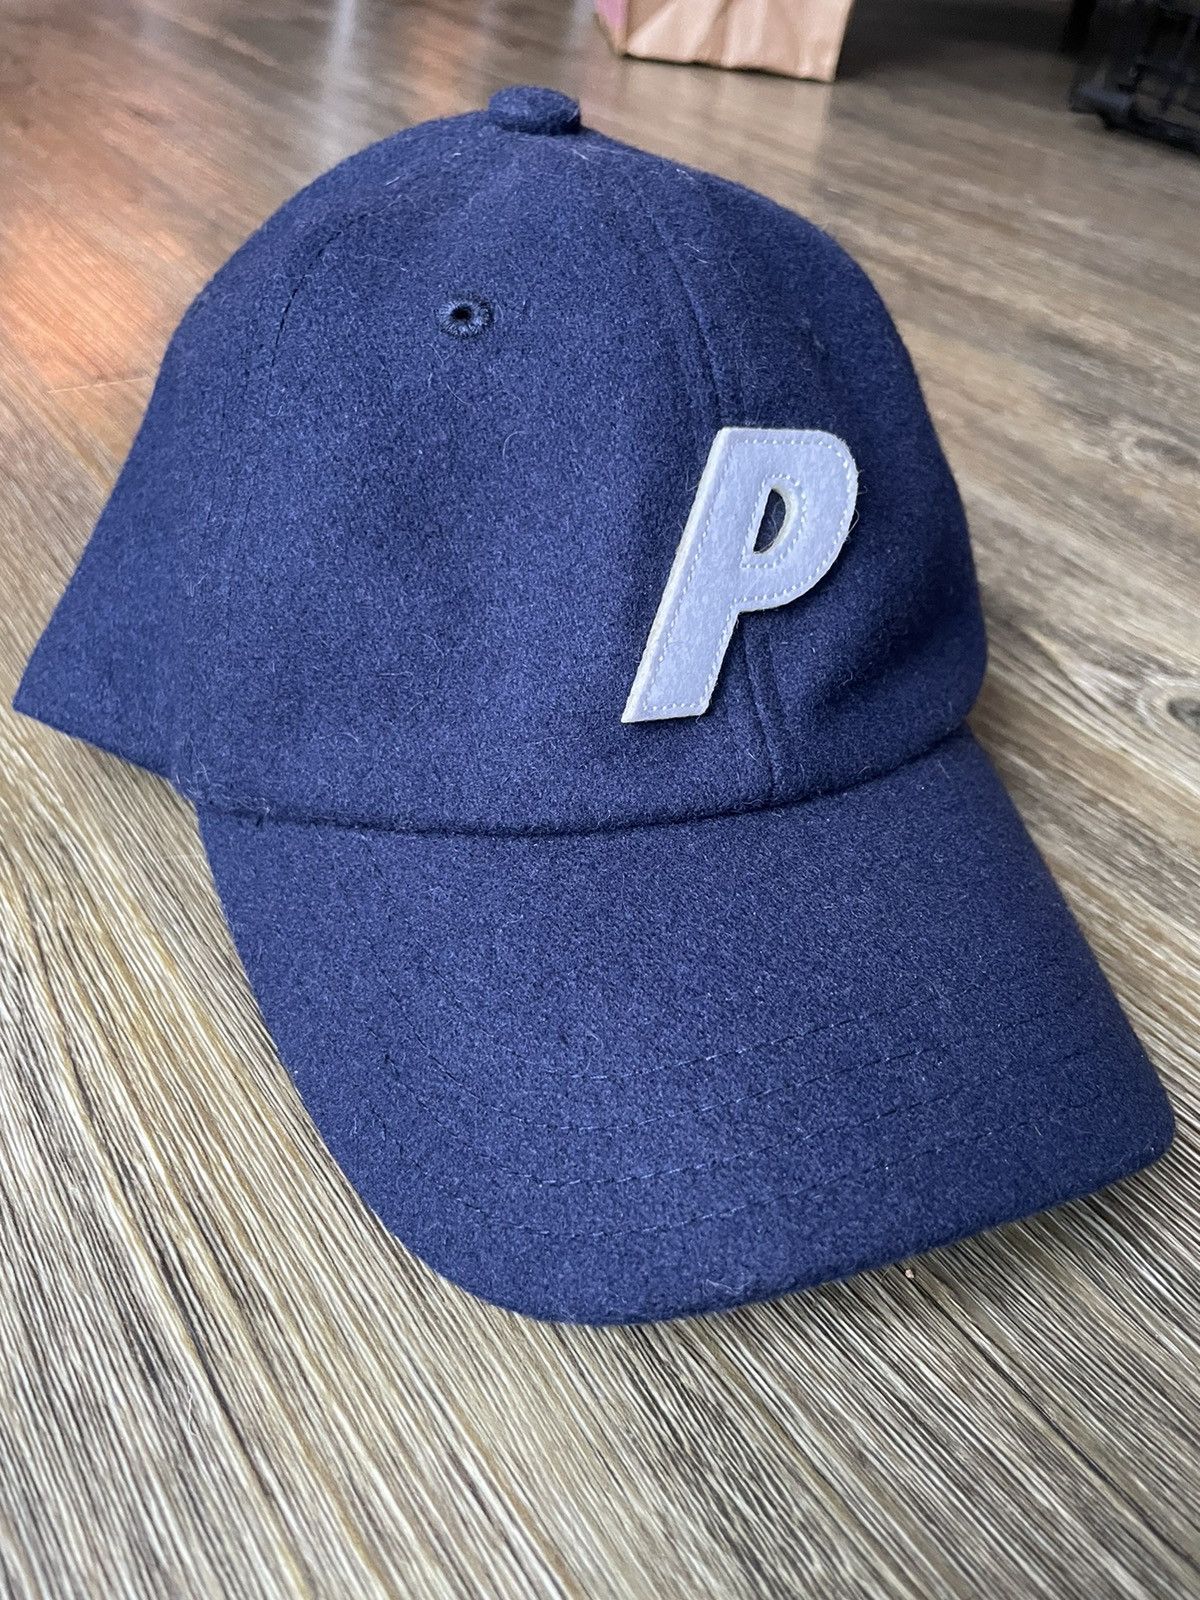 Palace Palace P Wool 6-Panel Cap/Hat - Navy | Grailed